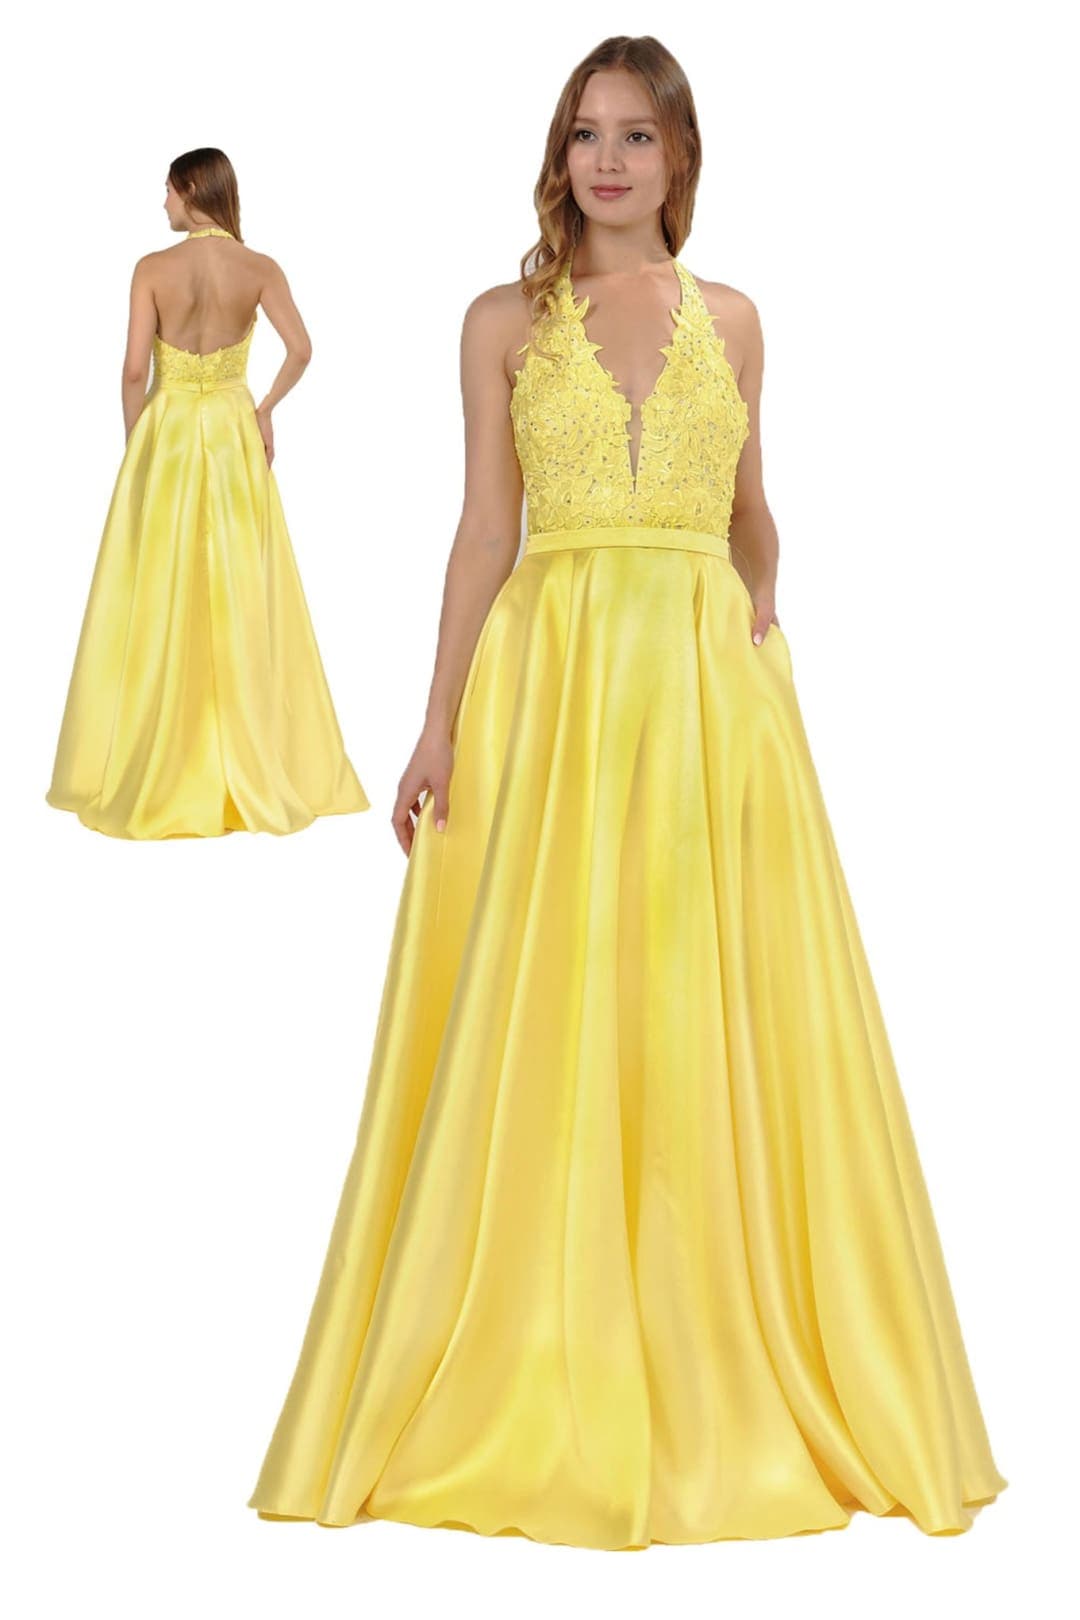 Halter Prom Evening Gown